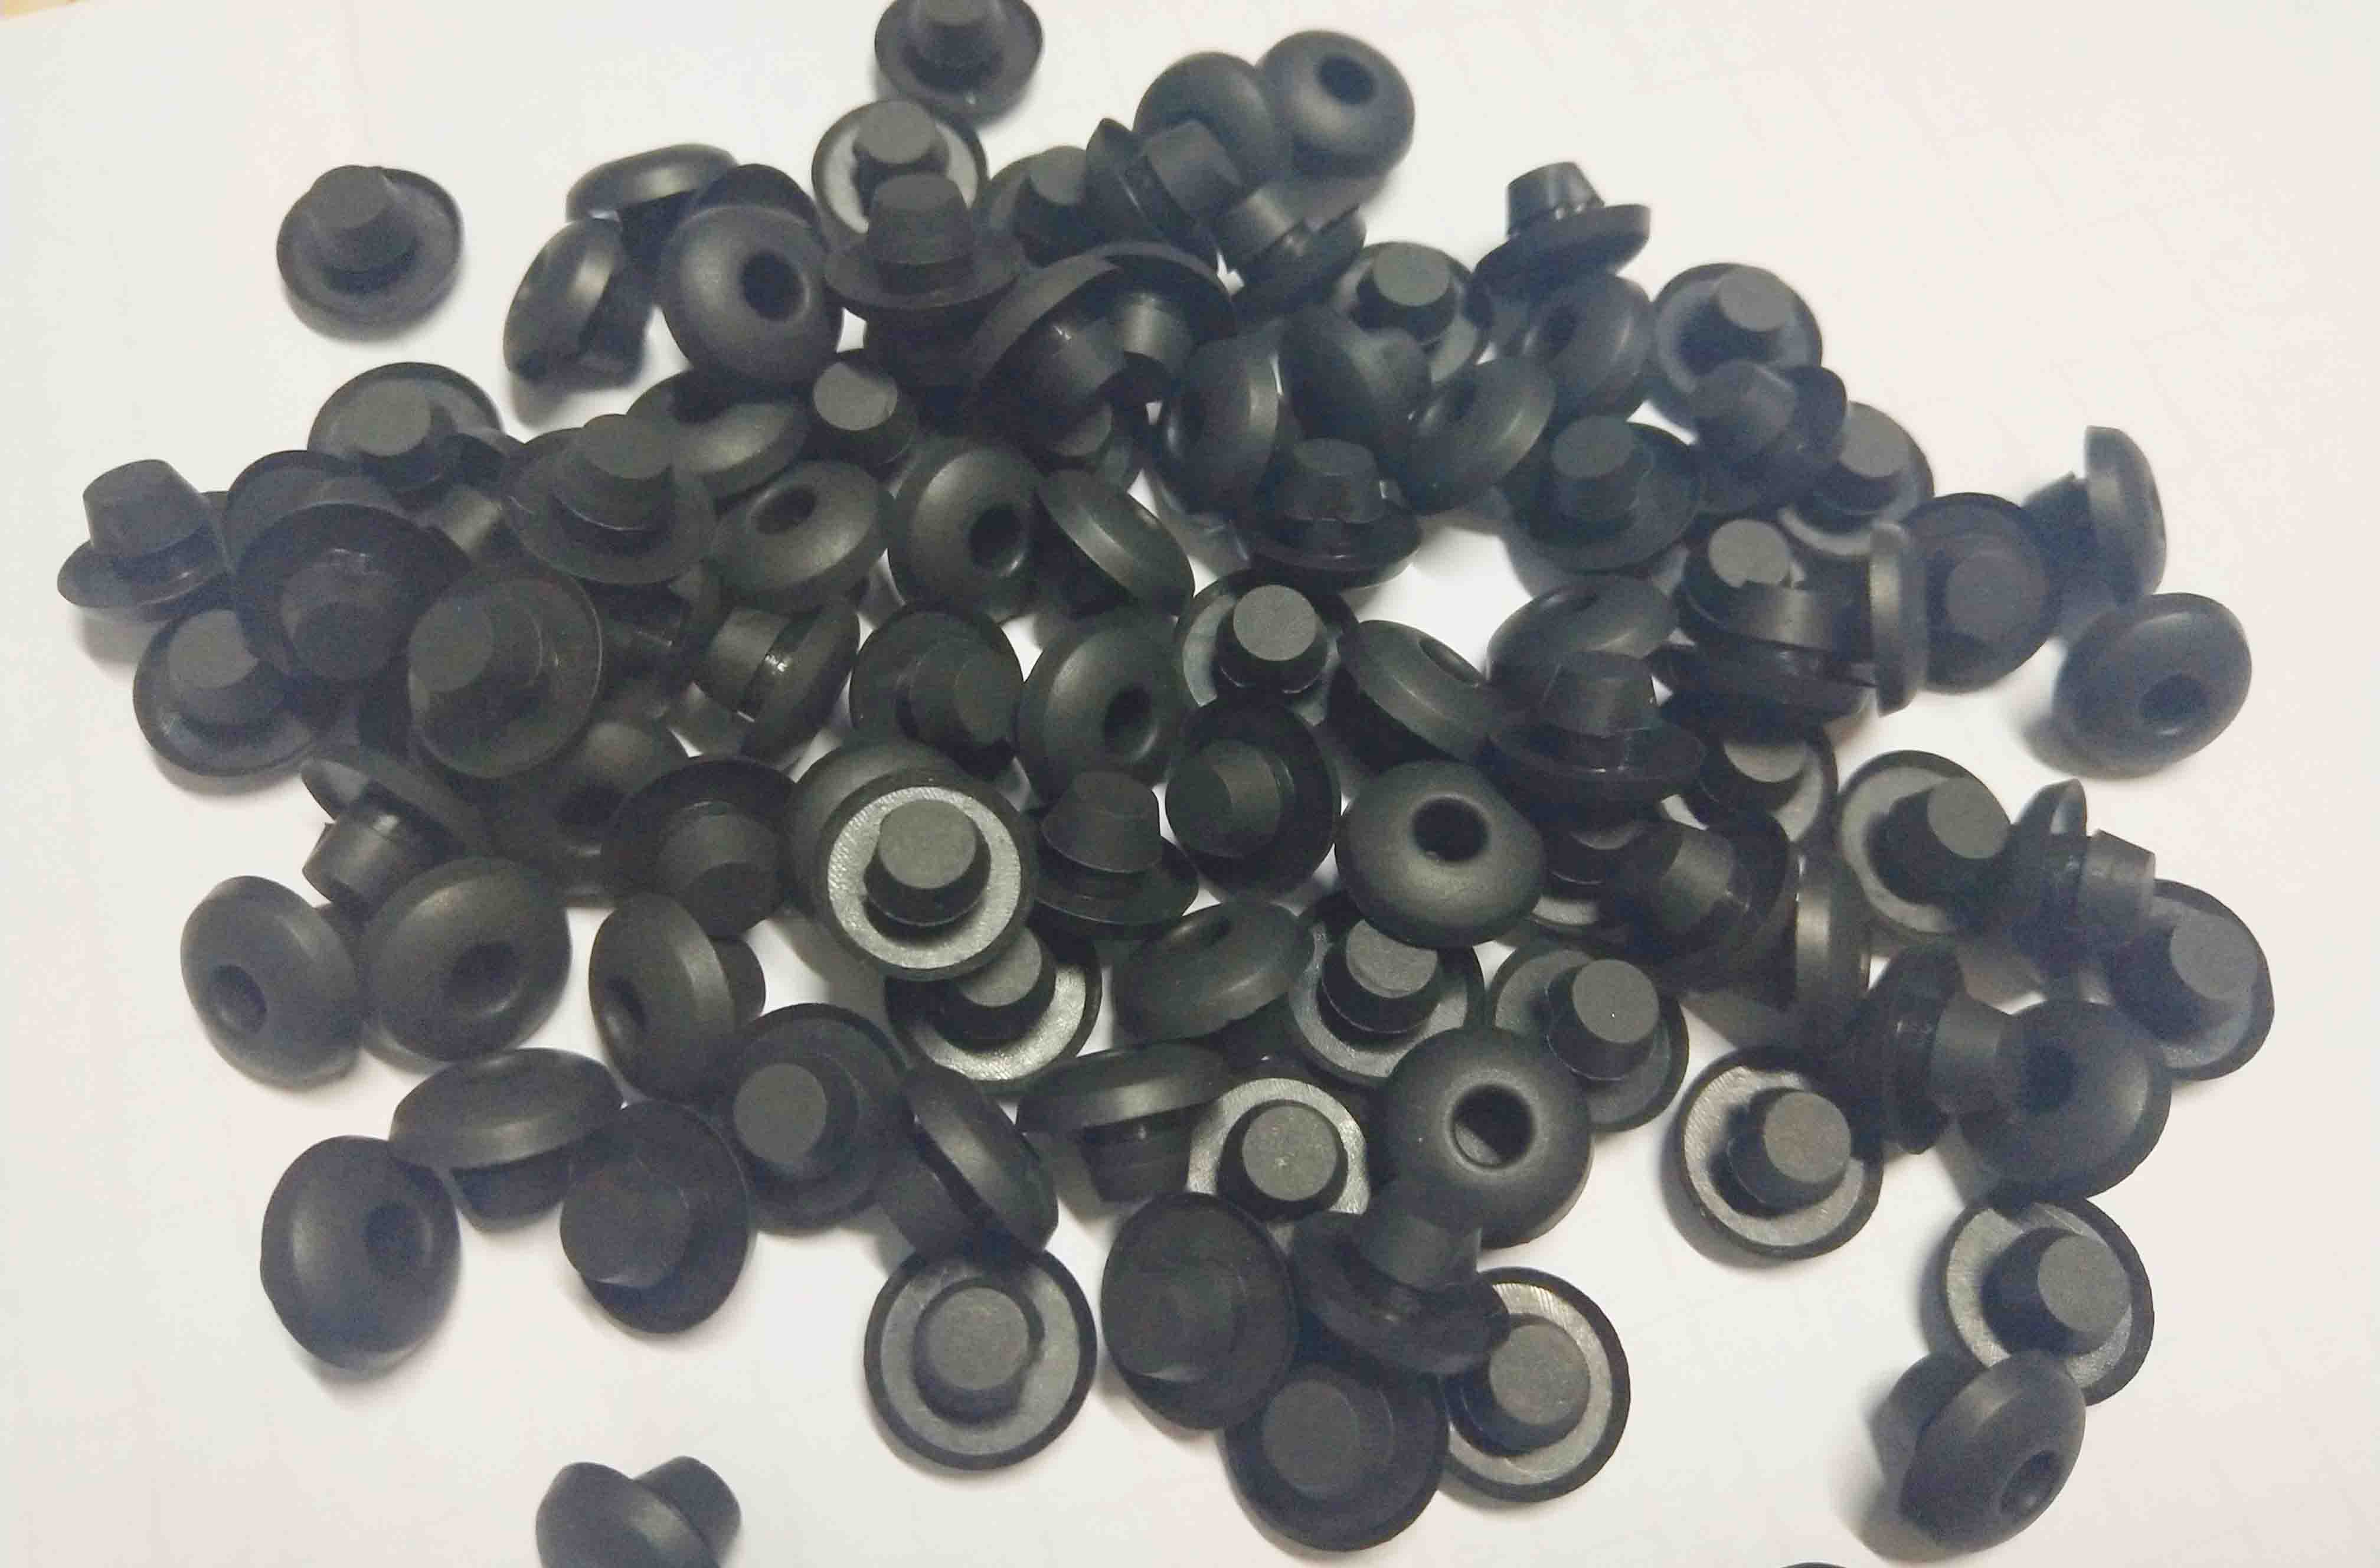 Customized Rubber Molded Parts